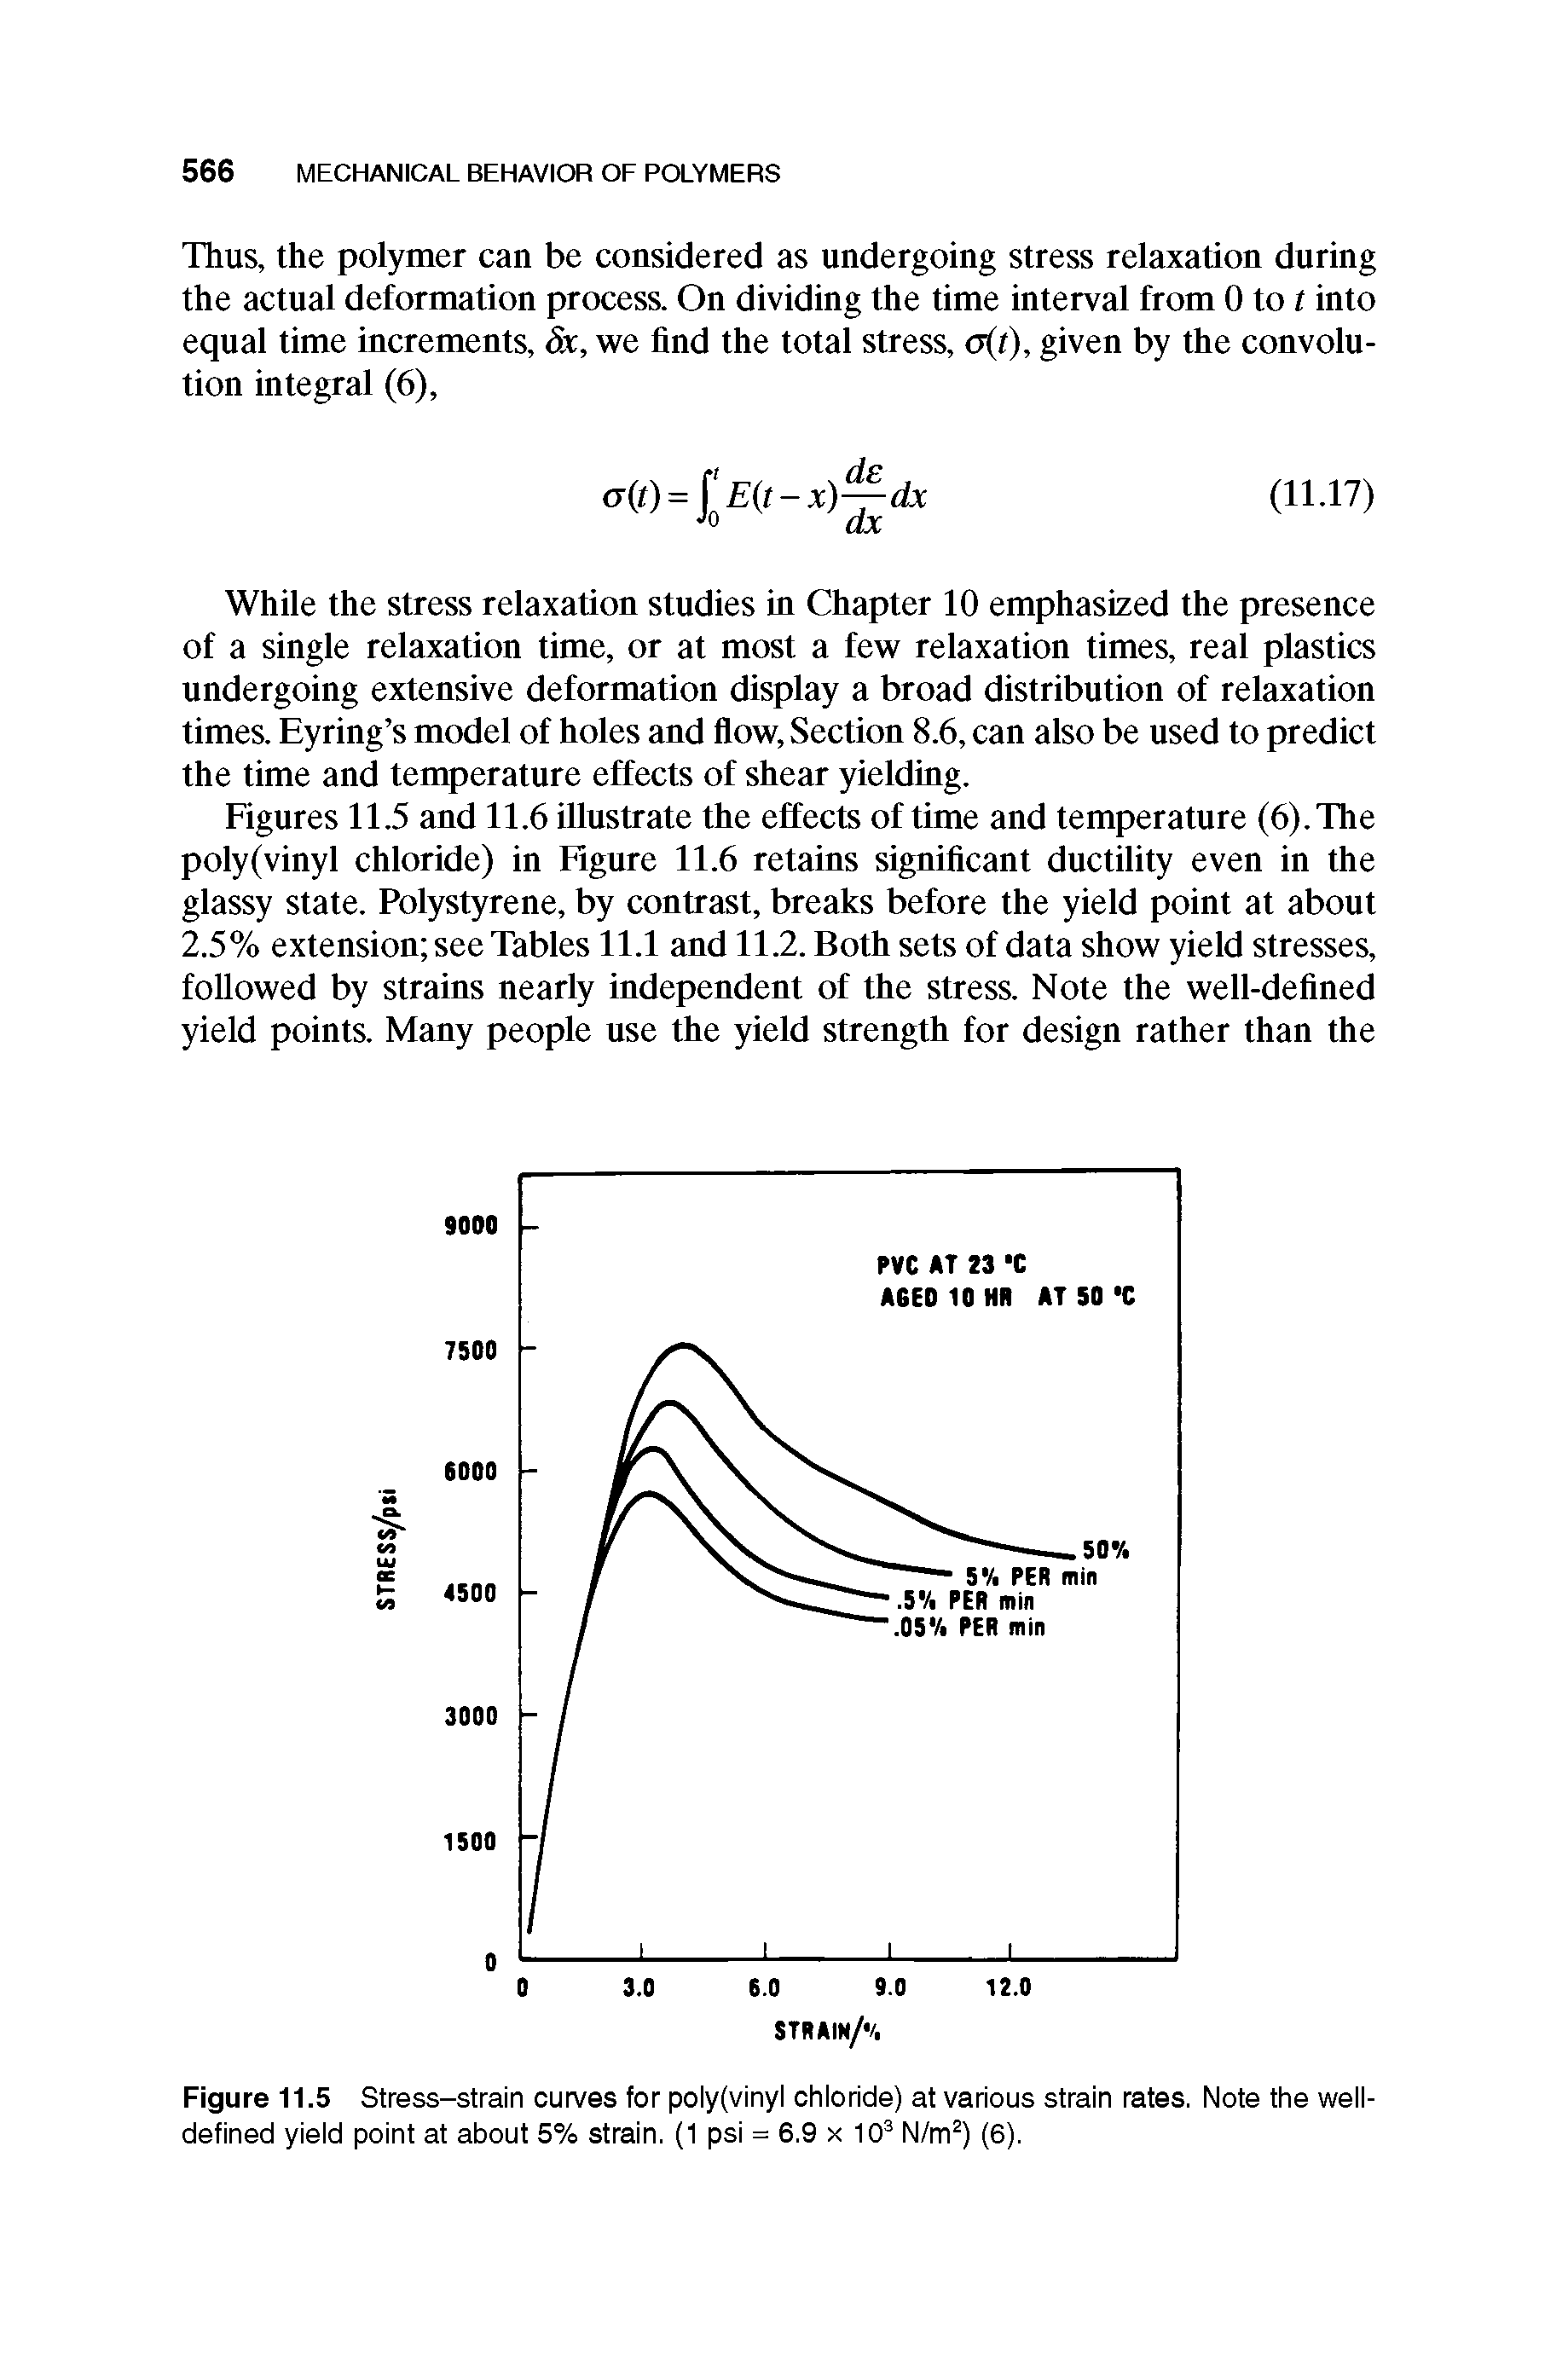 Figure 11.5 Stress-strain curves for poly(vinyl chloride) at various strain rates. Note the well-defined yield point at about 5% strain. (1 psi = 6.9 x 10 N/m ) (6).